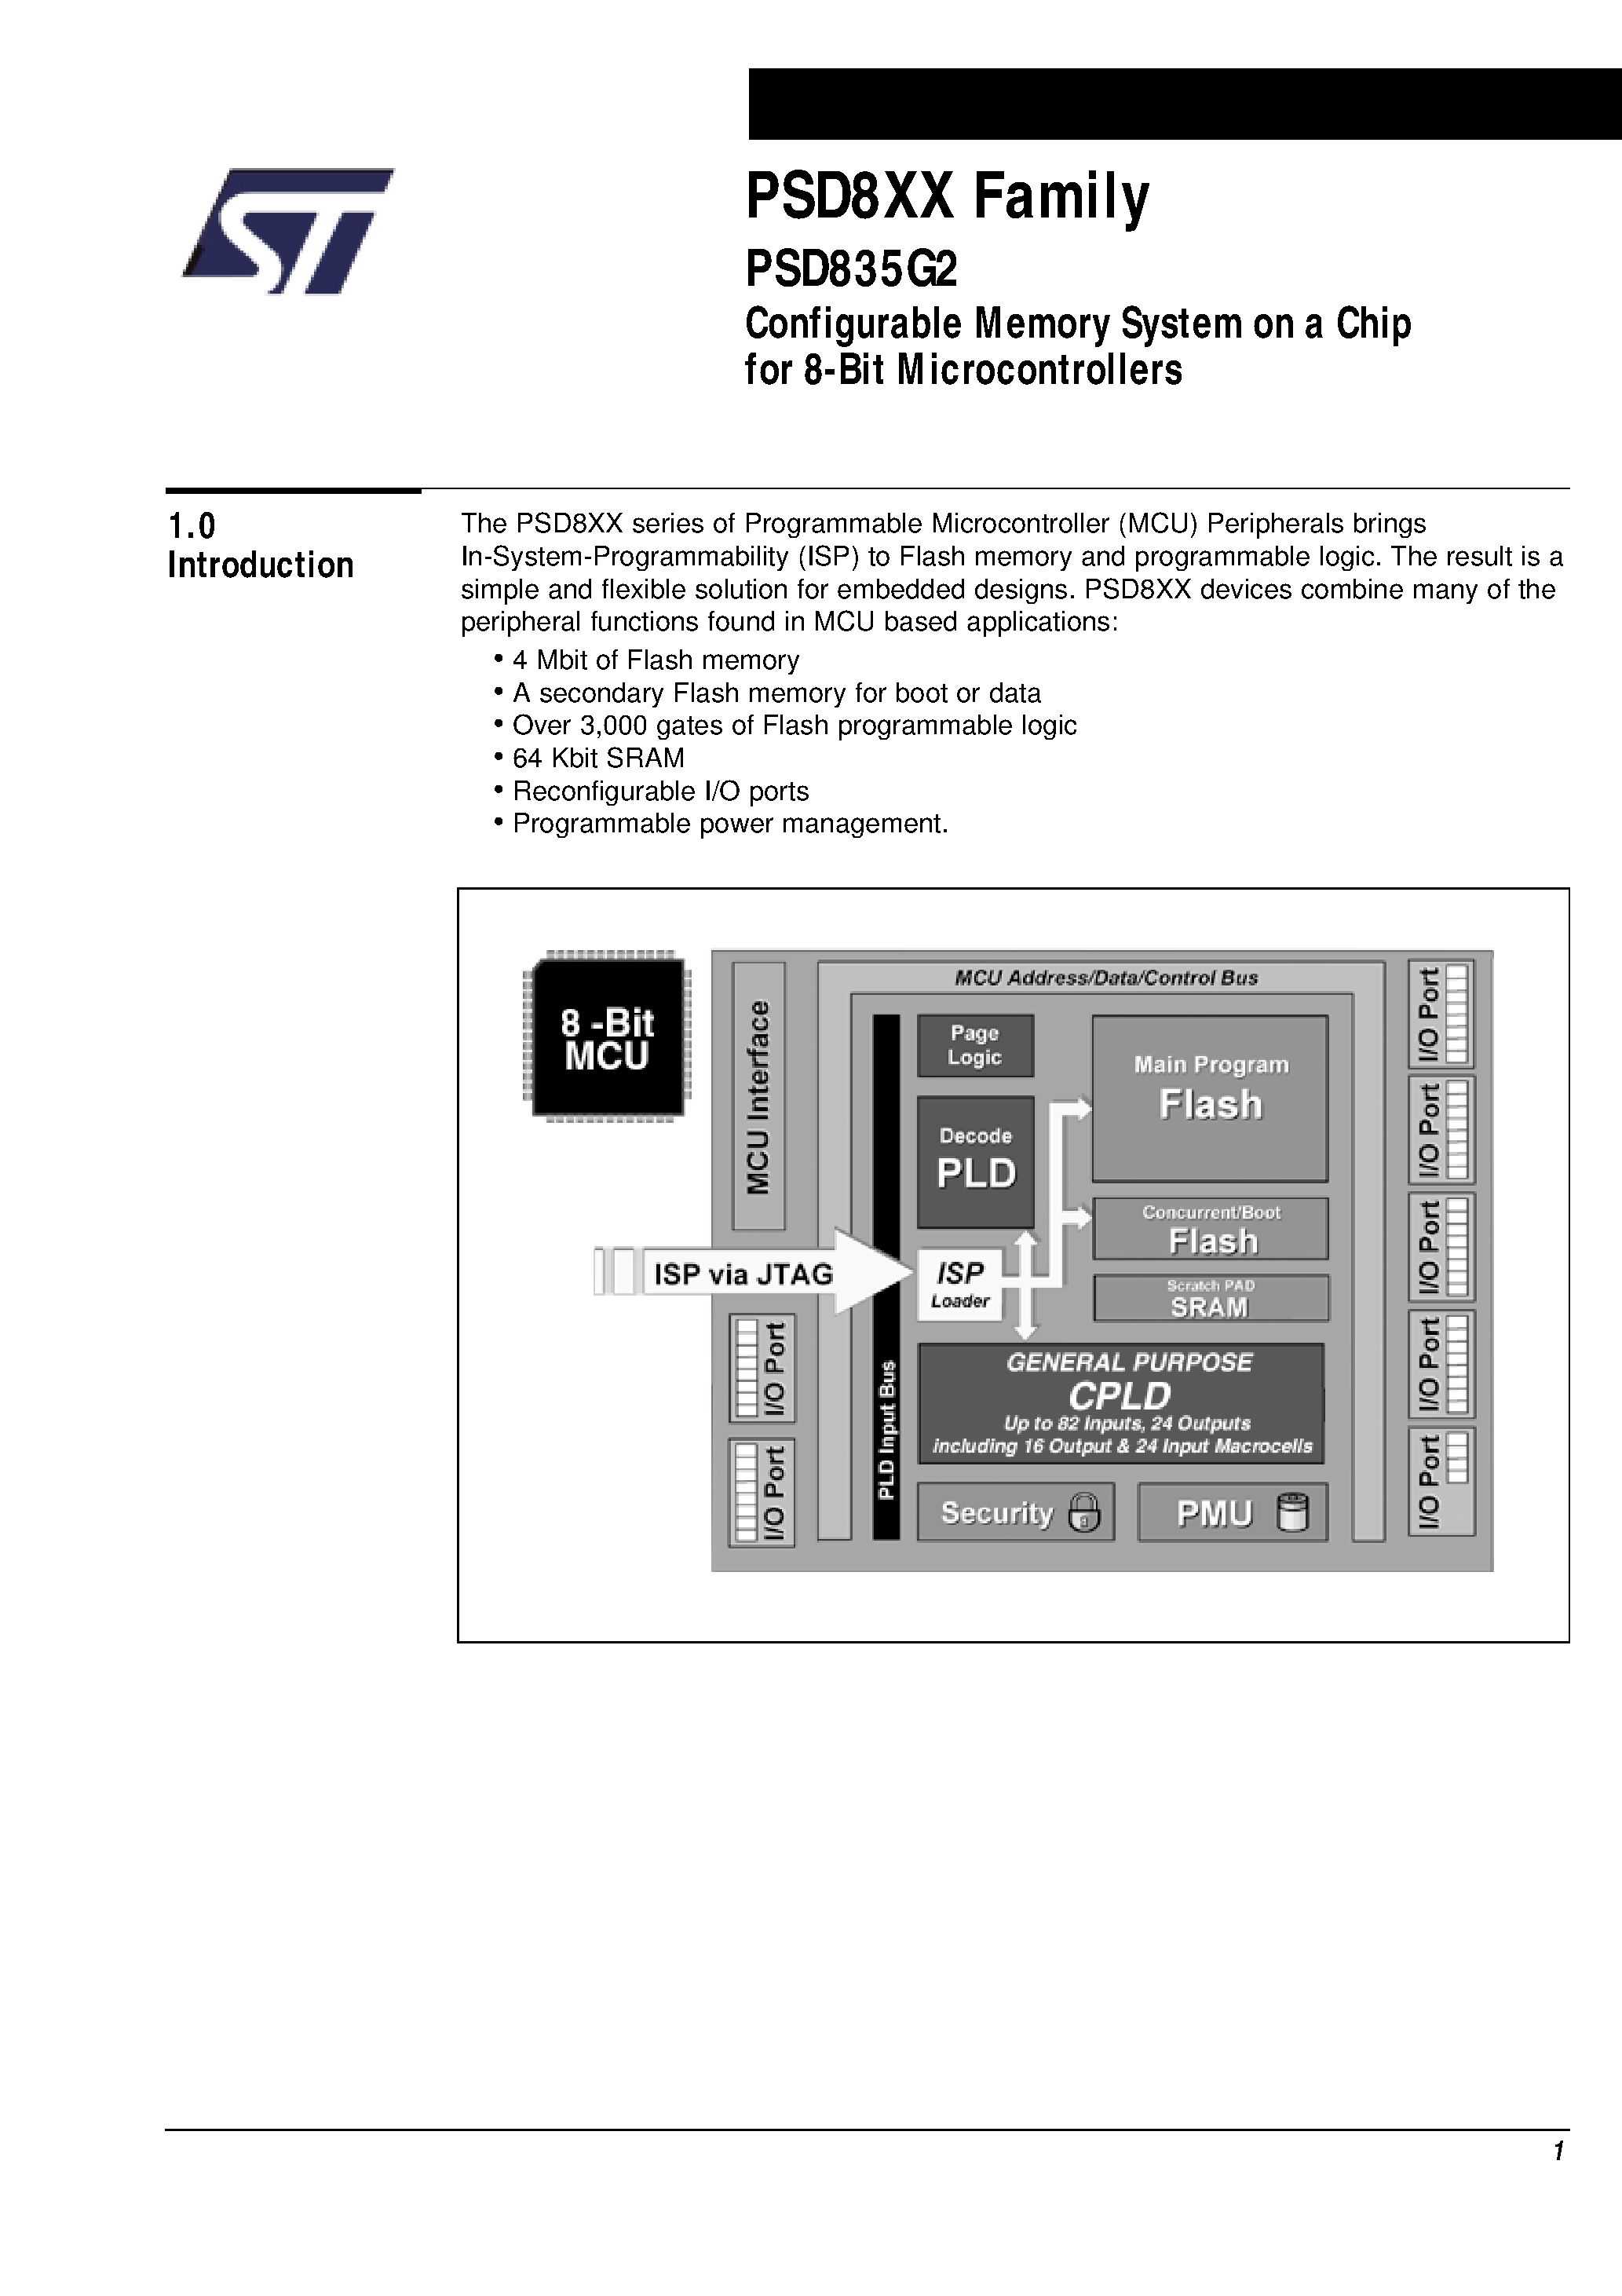 Datasheet PSD835F2V-A-20U - Configurable Memory System on a Chip for 8-Bit Microcontrollers page 2